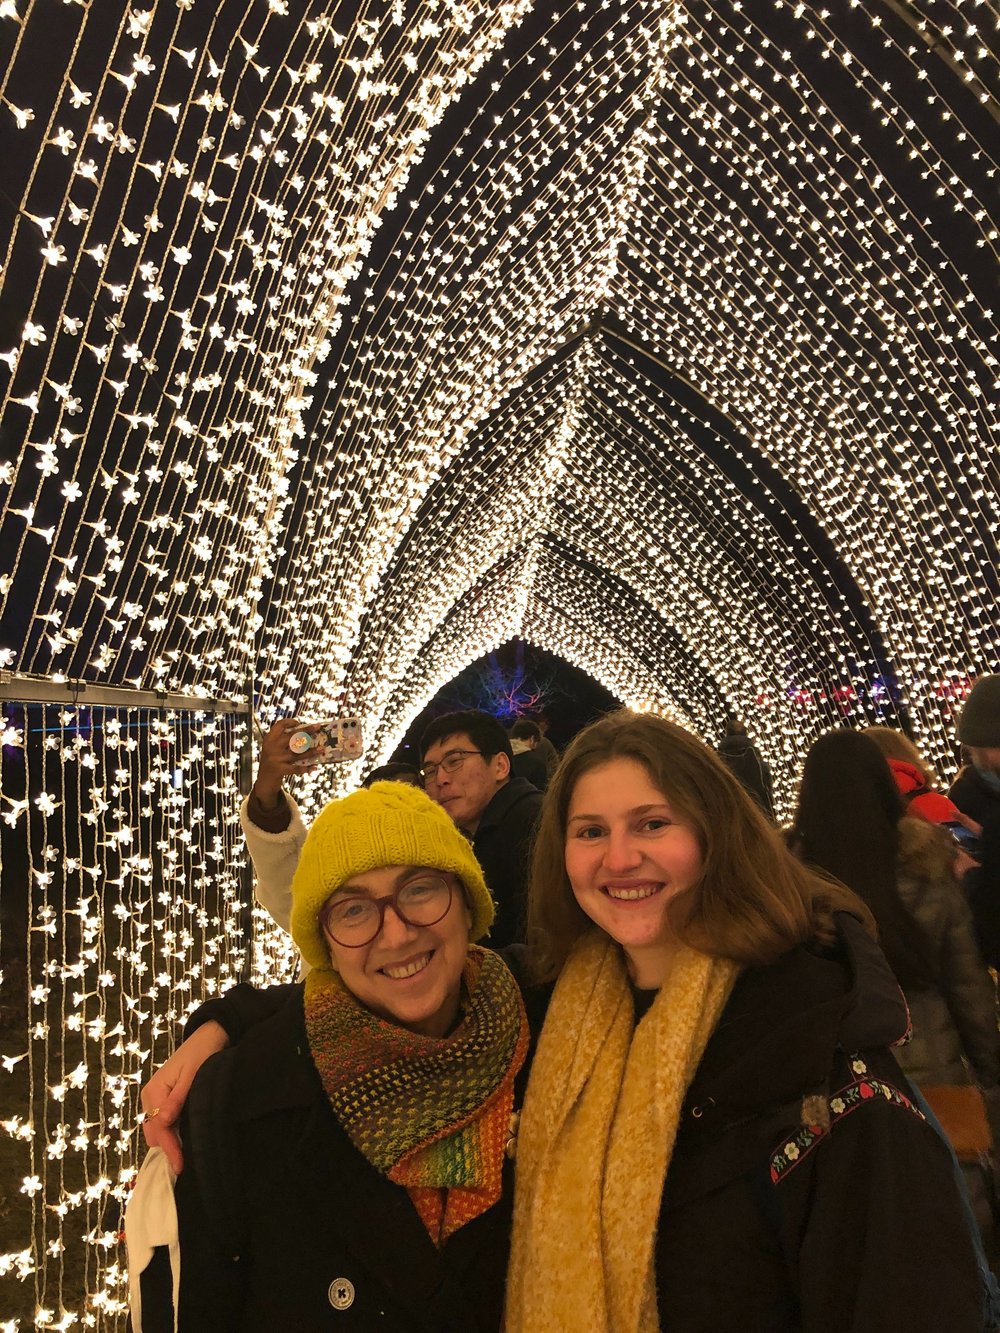 Julie and I in the tunnel of light at BBG